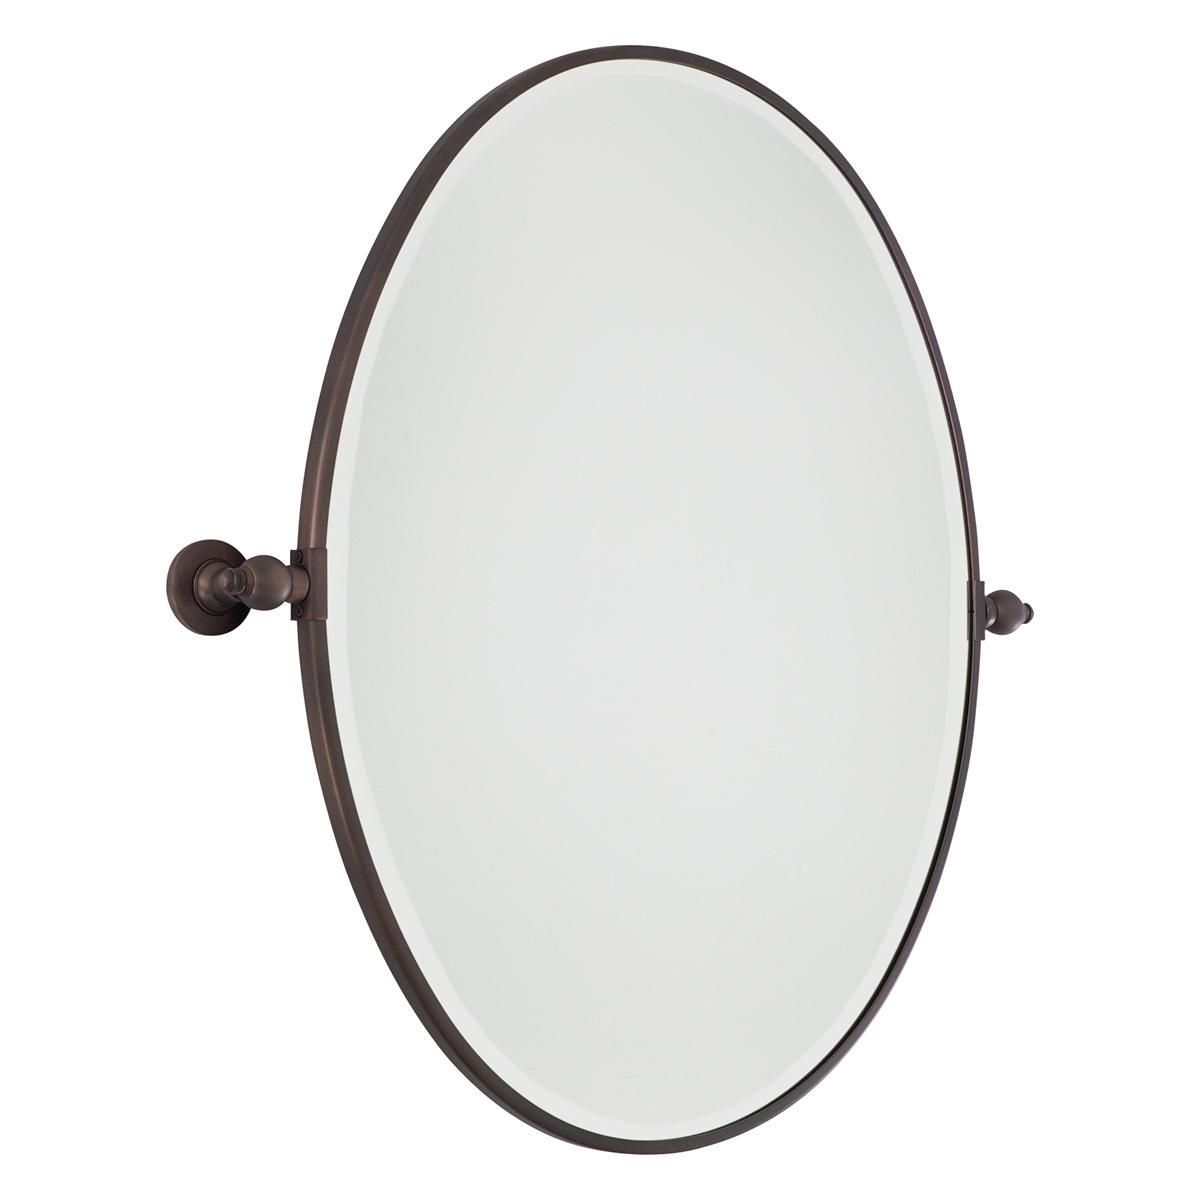 Oval Tilt Bathroom Mirror Large – 3 Finishes (with Images) | Pivot Intended For Ceiling Hung Oiled Bronze Oval Mirrors (View 6 of 15)